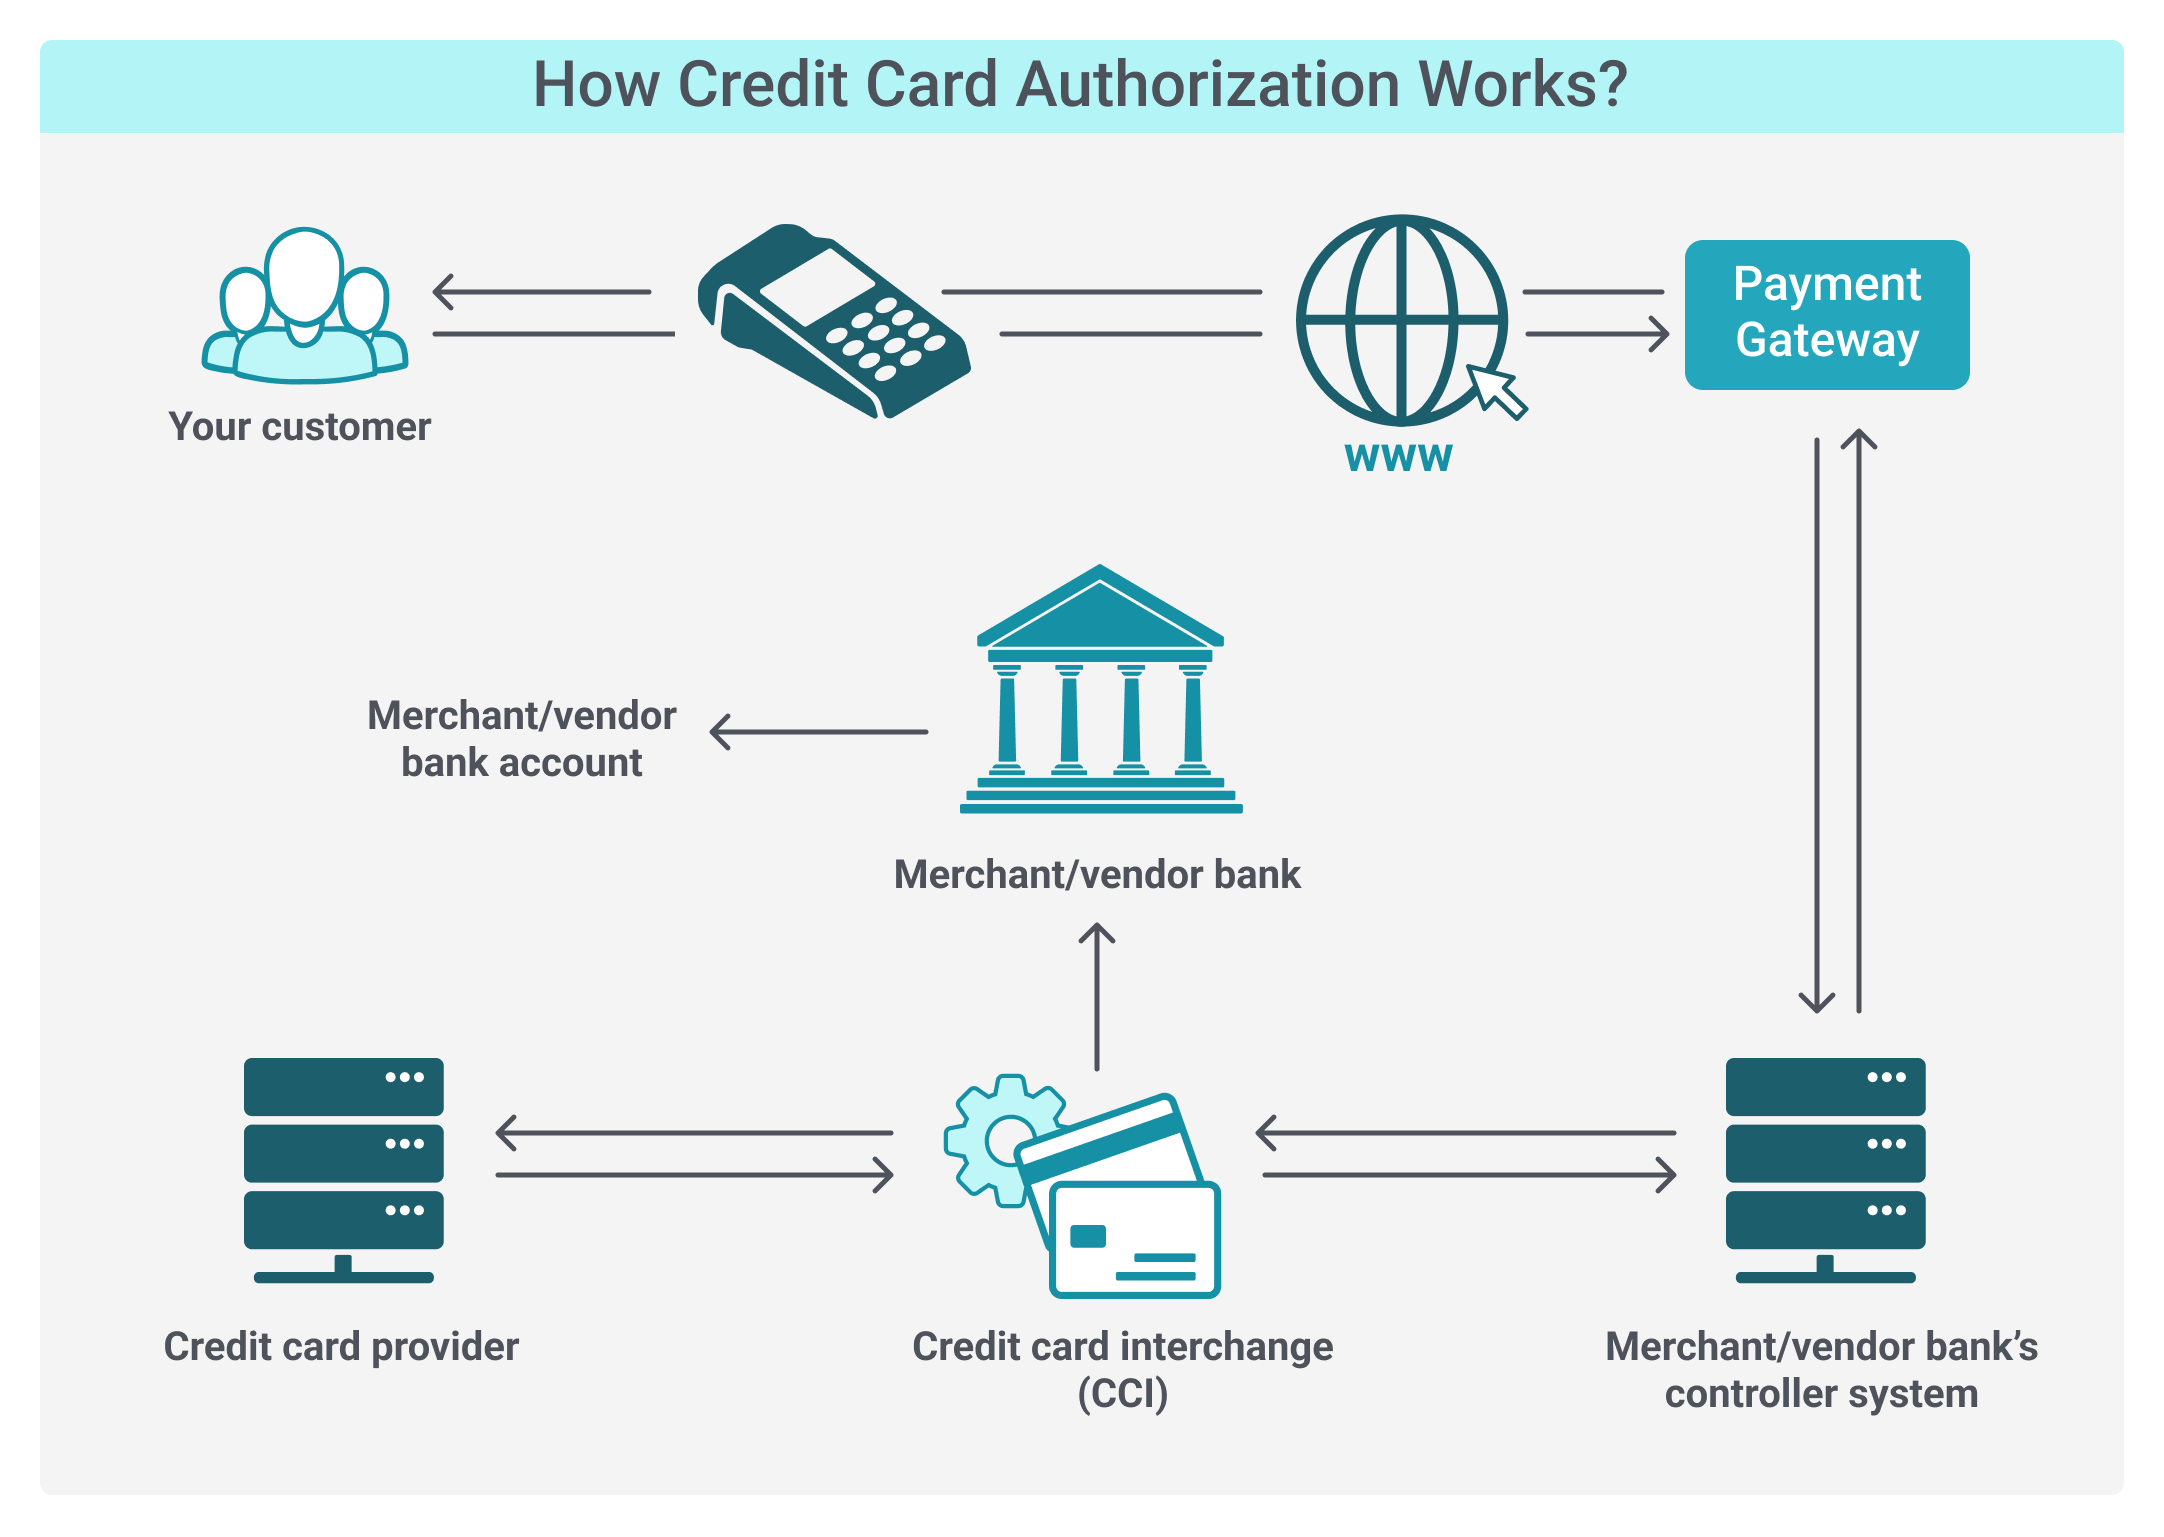 How Credit Card Authorization Works?